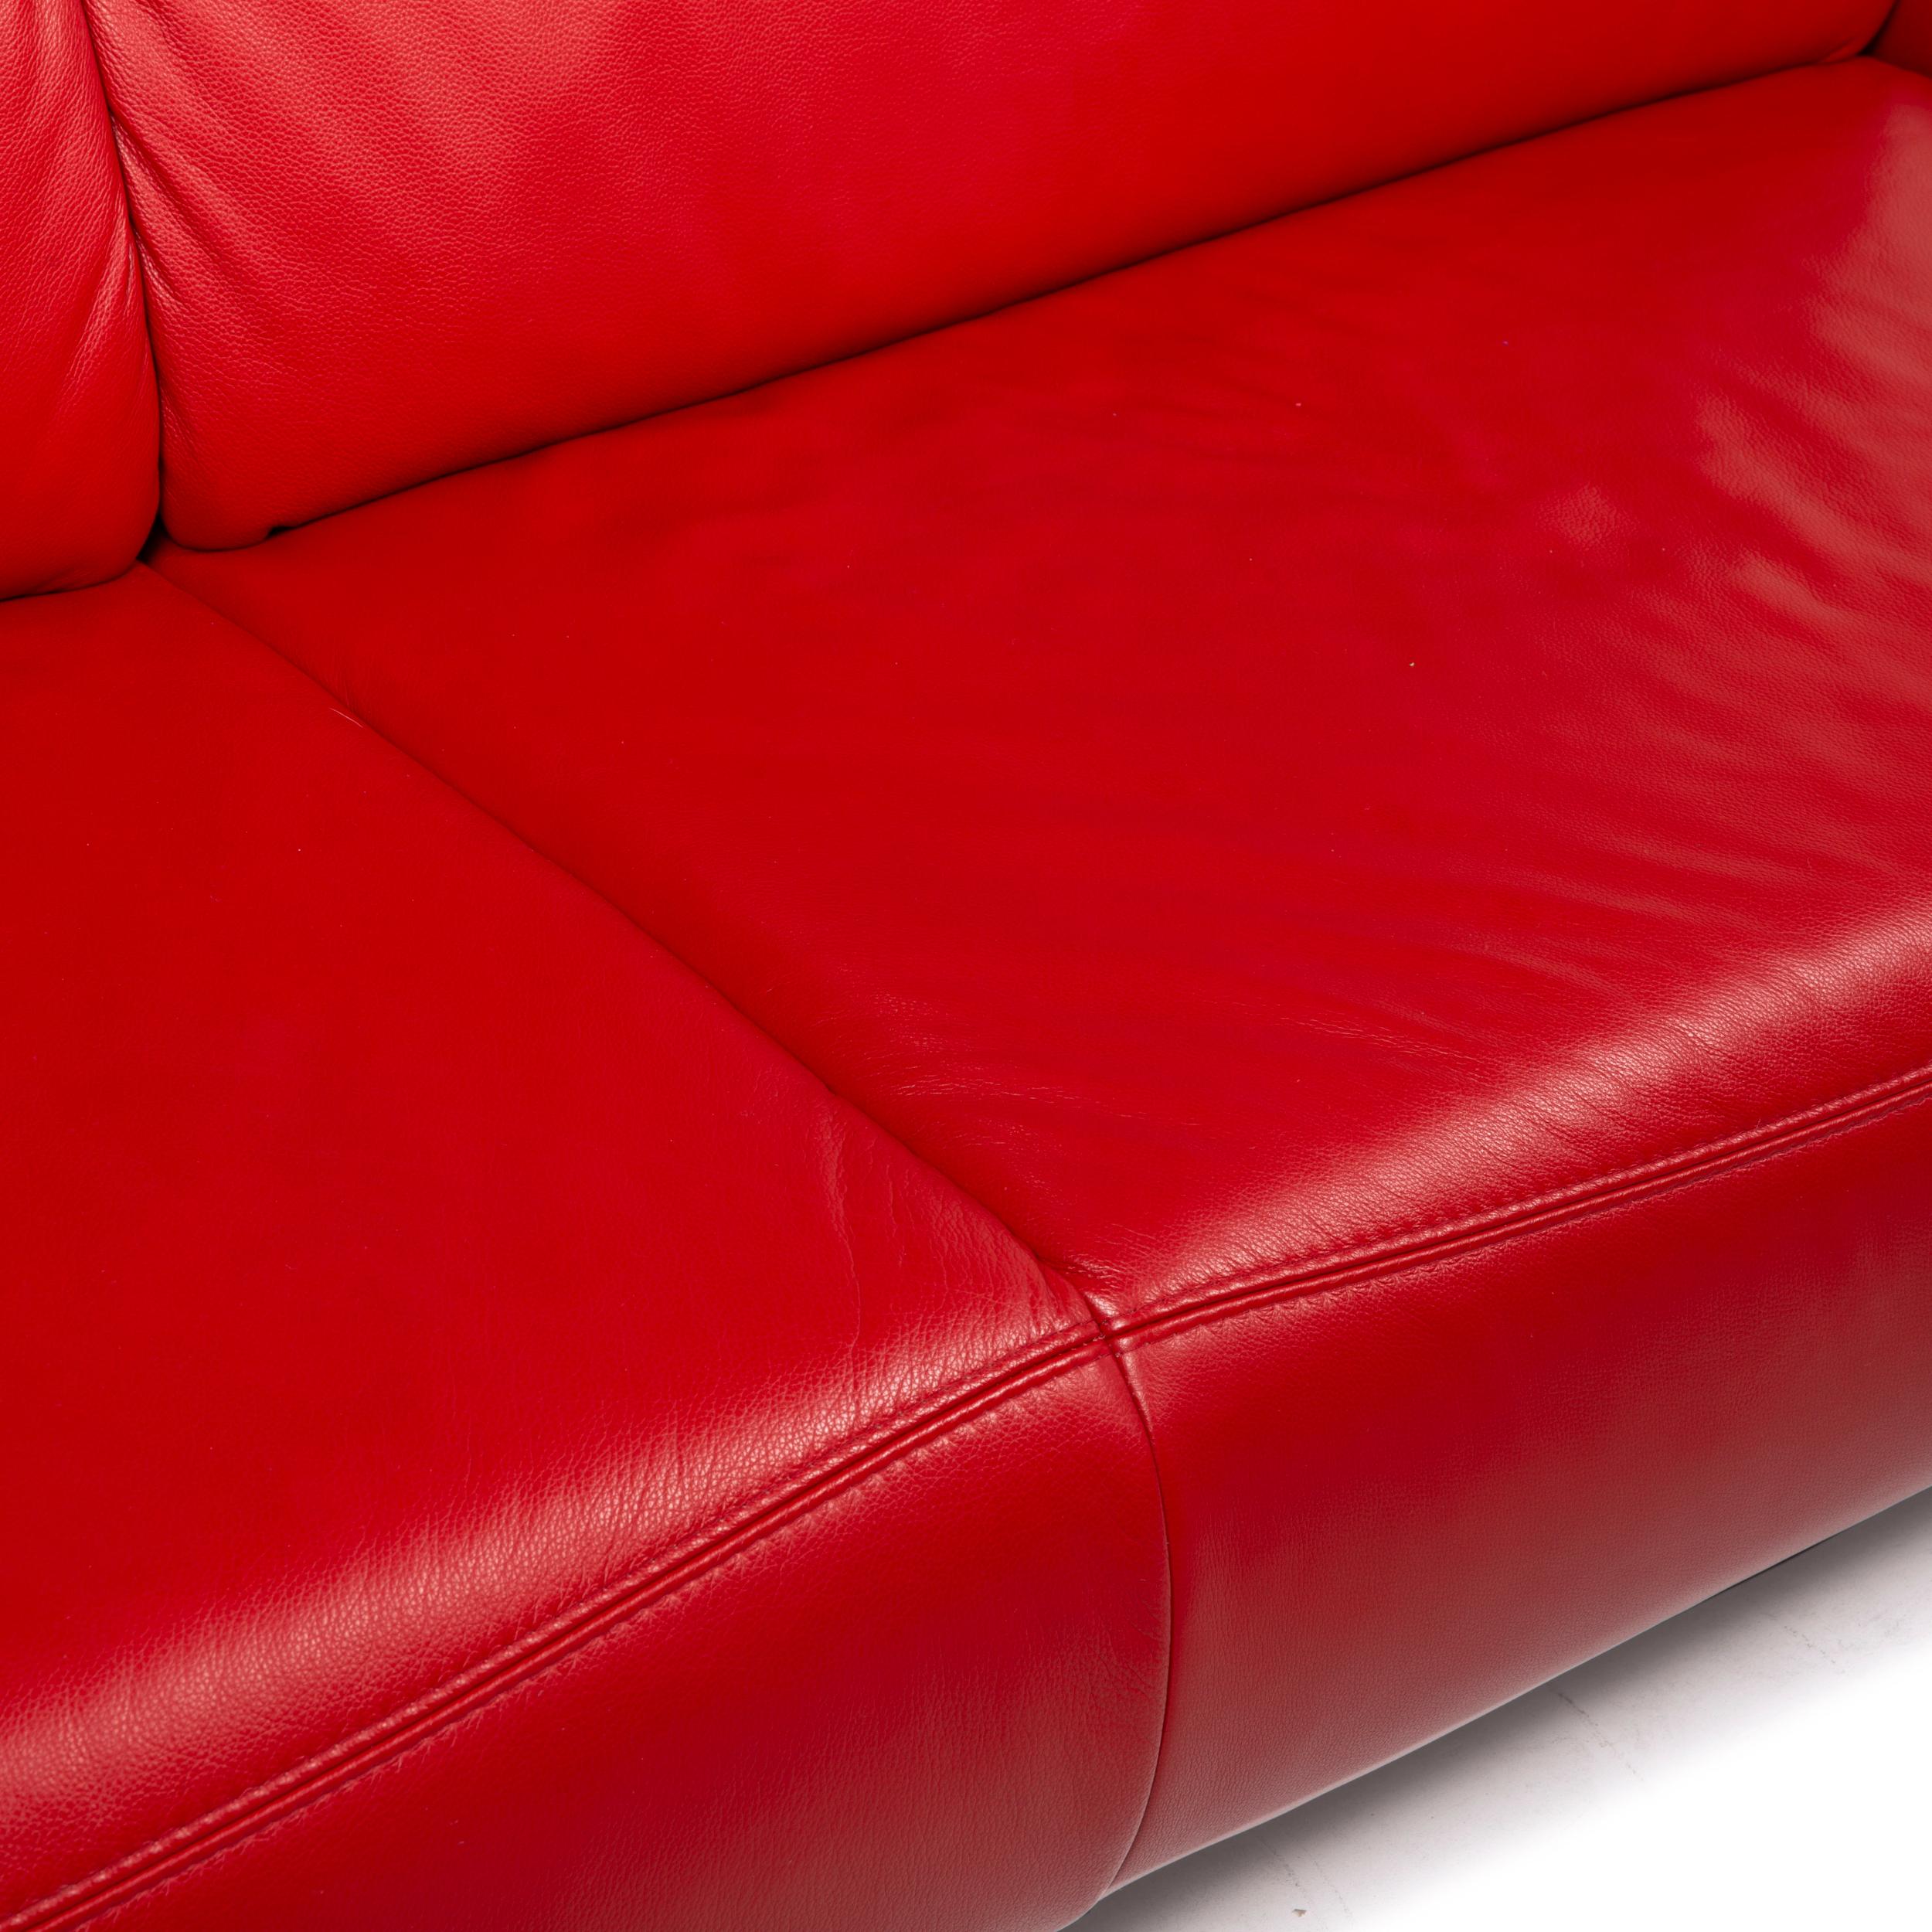 European Musterring Mr-740 Leather Sofa Red Three-Seater Function